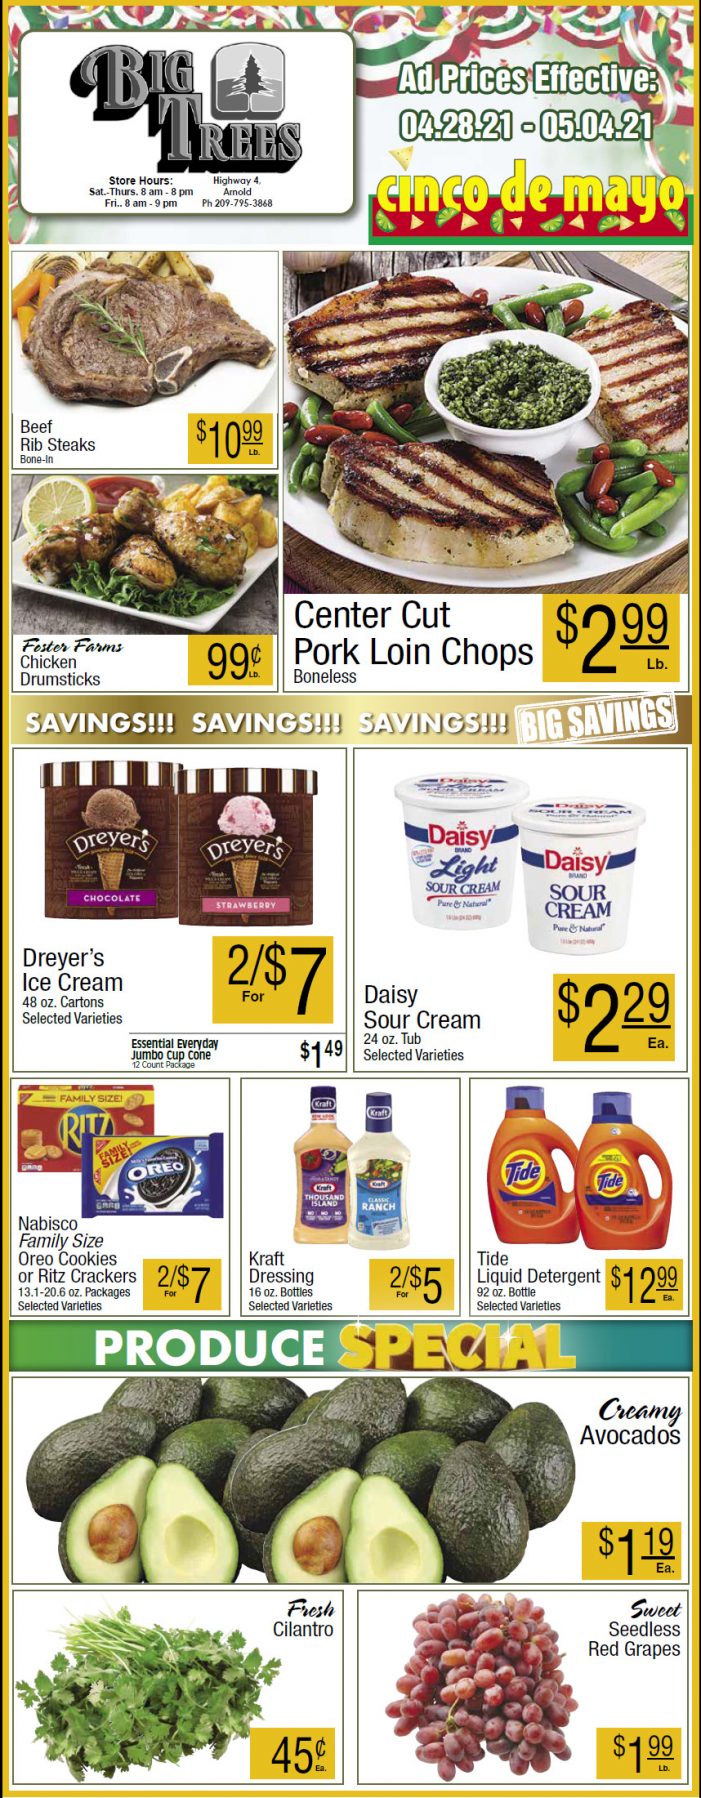 Big Trees Market Weekly Ad & Grocery Specials Through May4th!  Shop Local & Save!!